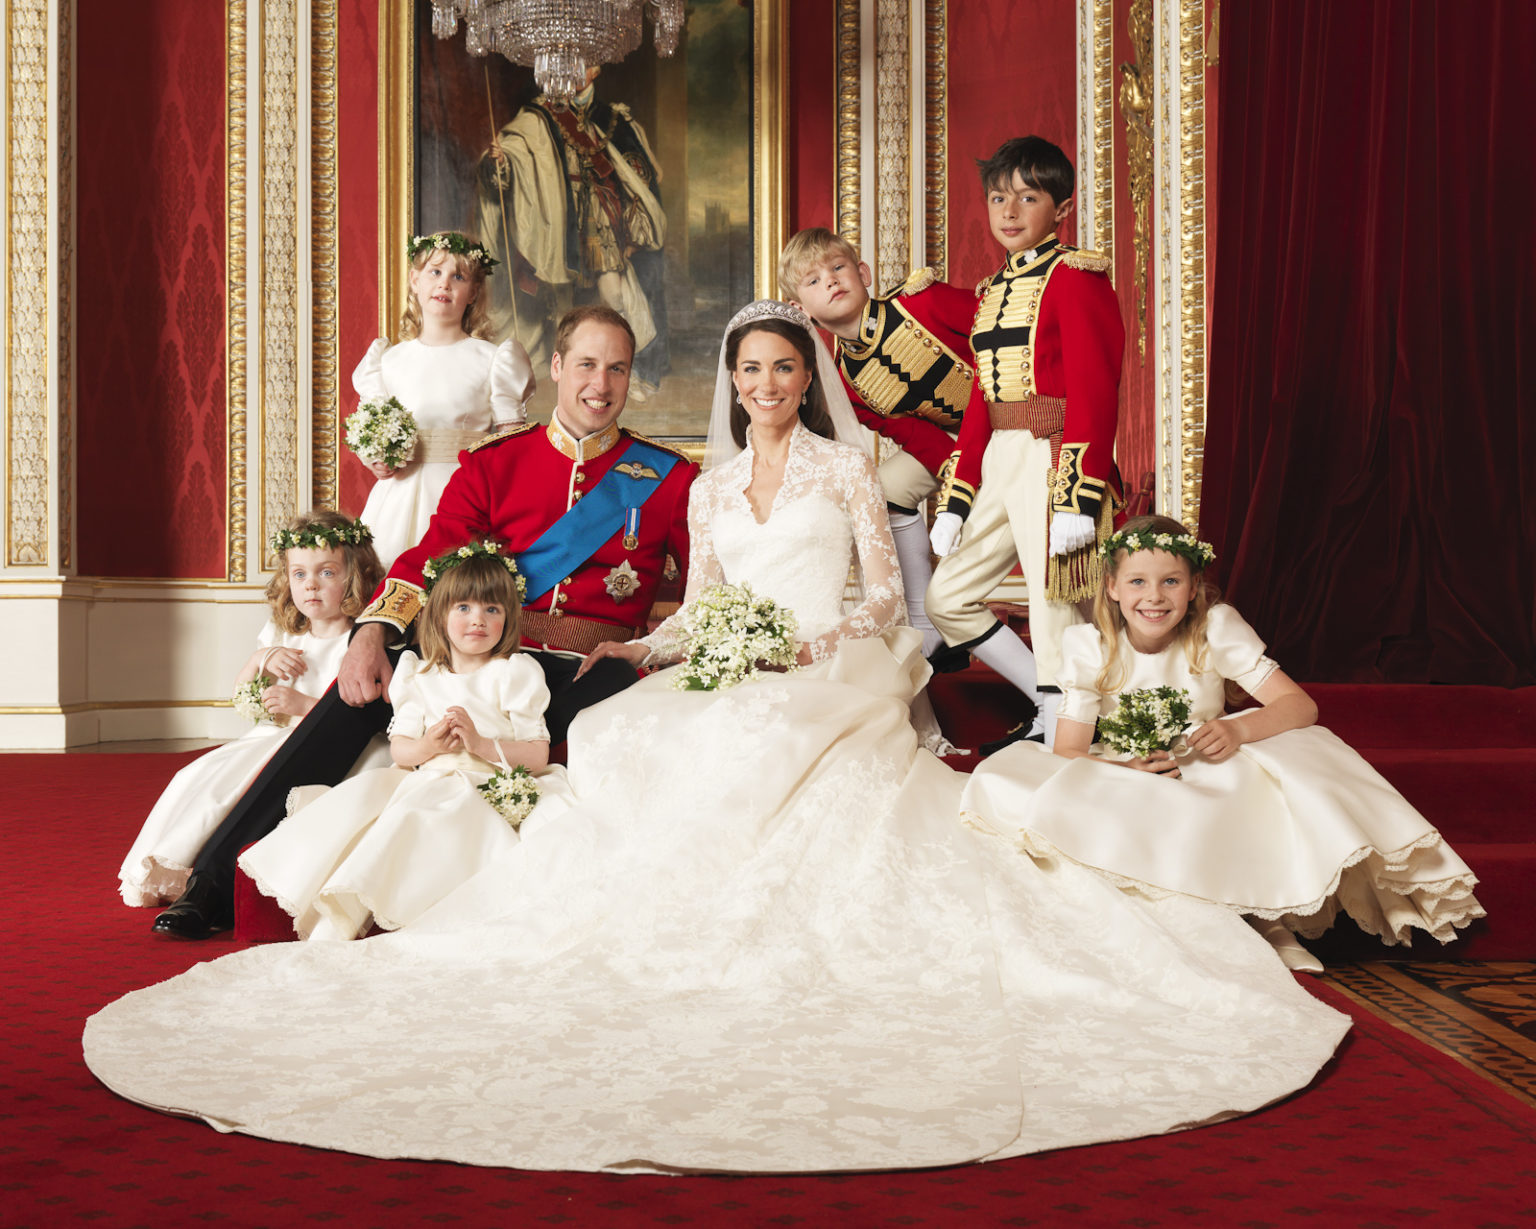 Official Wedding picture of The Duke and Duchess of Cambridge's wedding